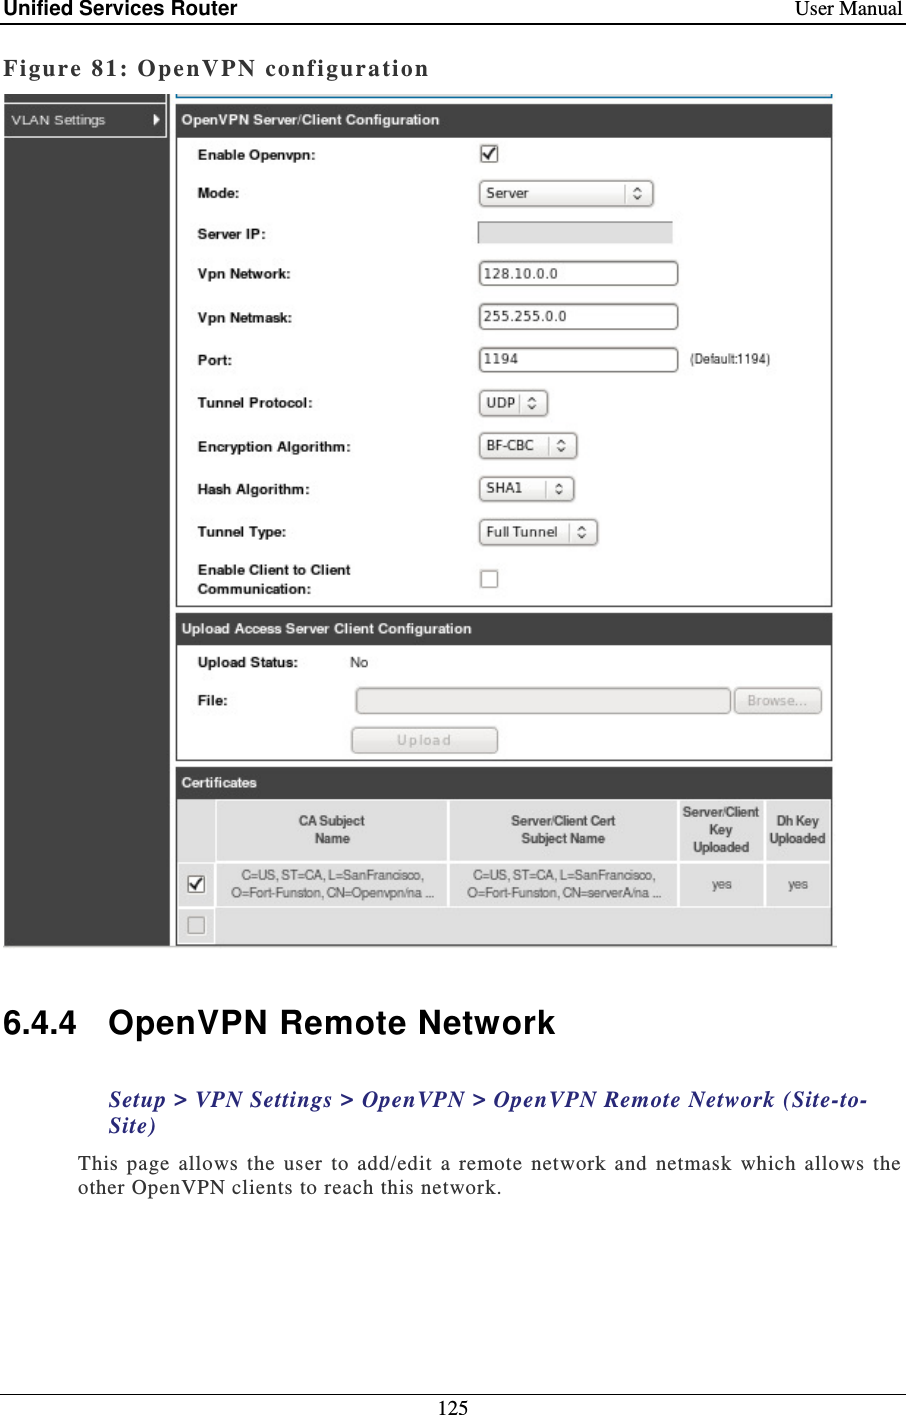 Unified Services Router    User Manual 125  Figure 81: Ope nVPN configuration    6.4.4  OpenVPN Remote Network Setup &gt; VPN Settings &gt; OpenVPN &gt; OpenVPN Remote Network (Site-to-Site) This  page  allows  the  user  to  add/edit  a  remote  network  and  netmask  which  allows  the other OpenVPN clients to reach this network.  